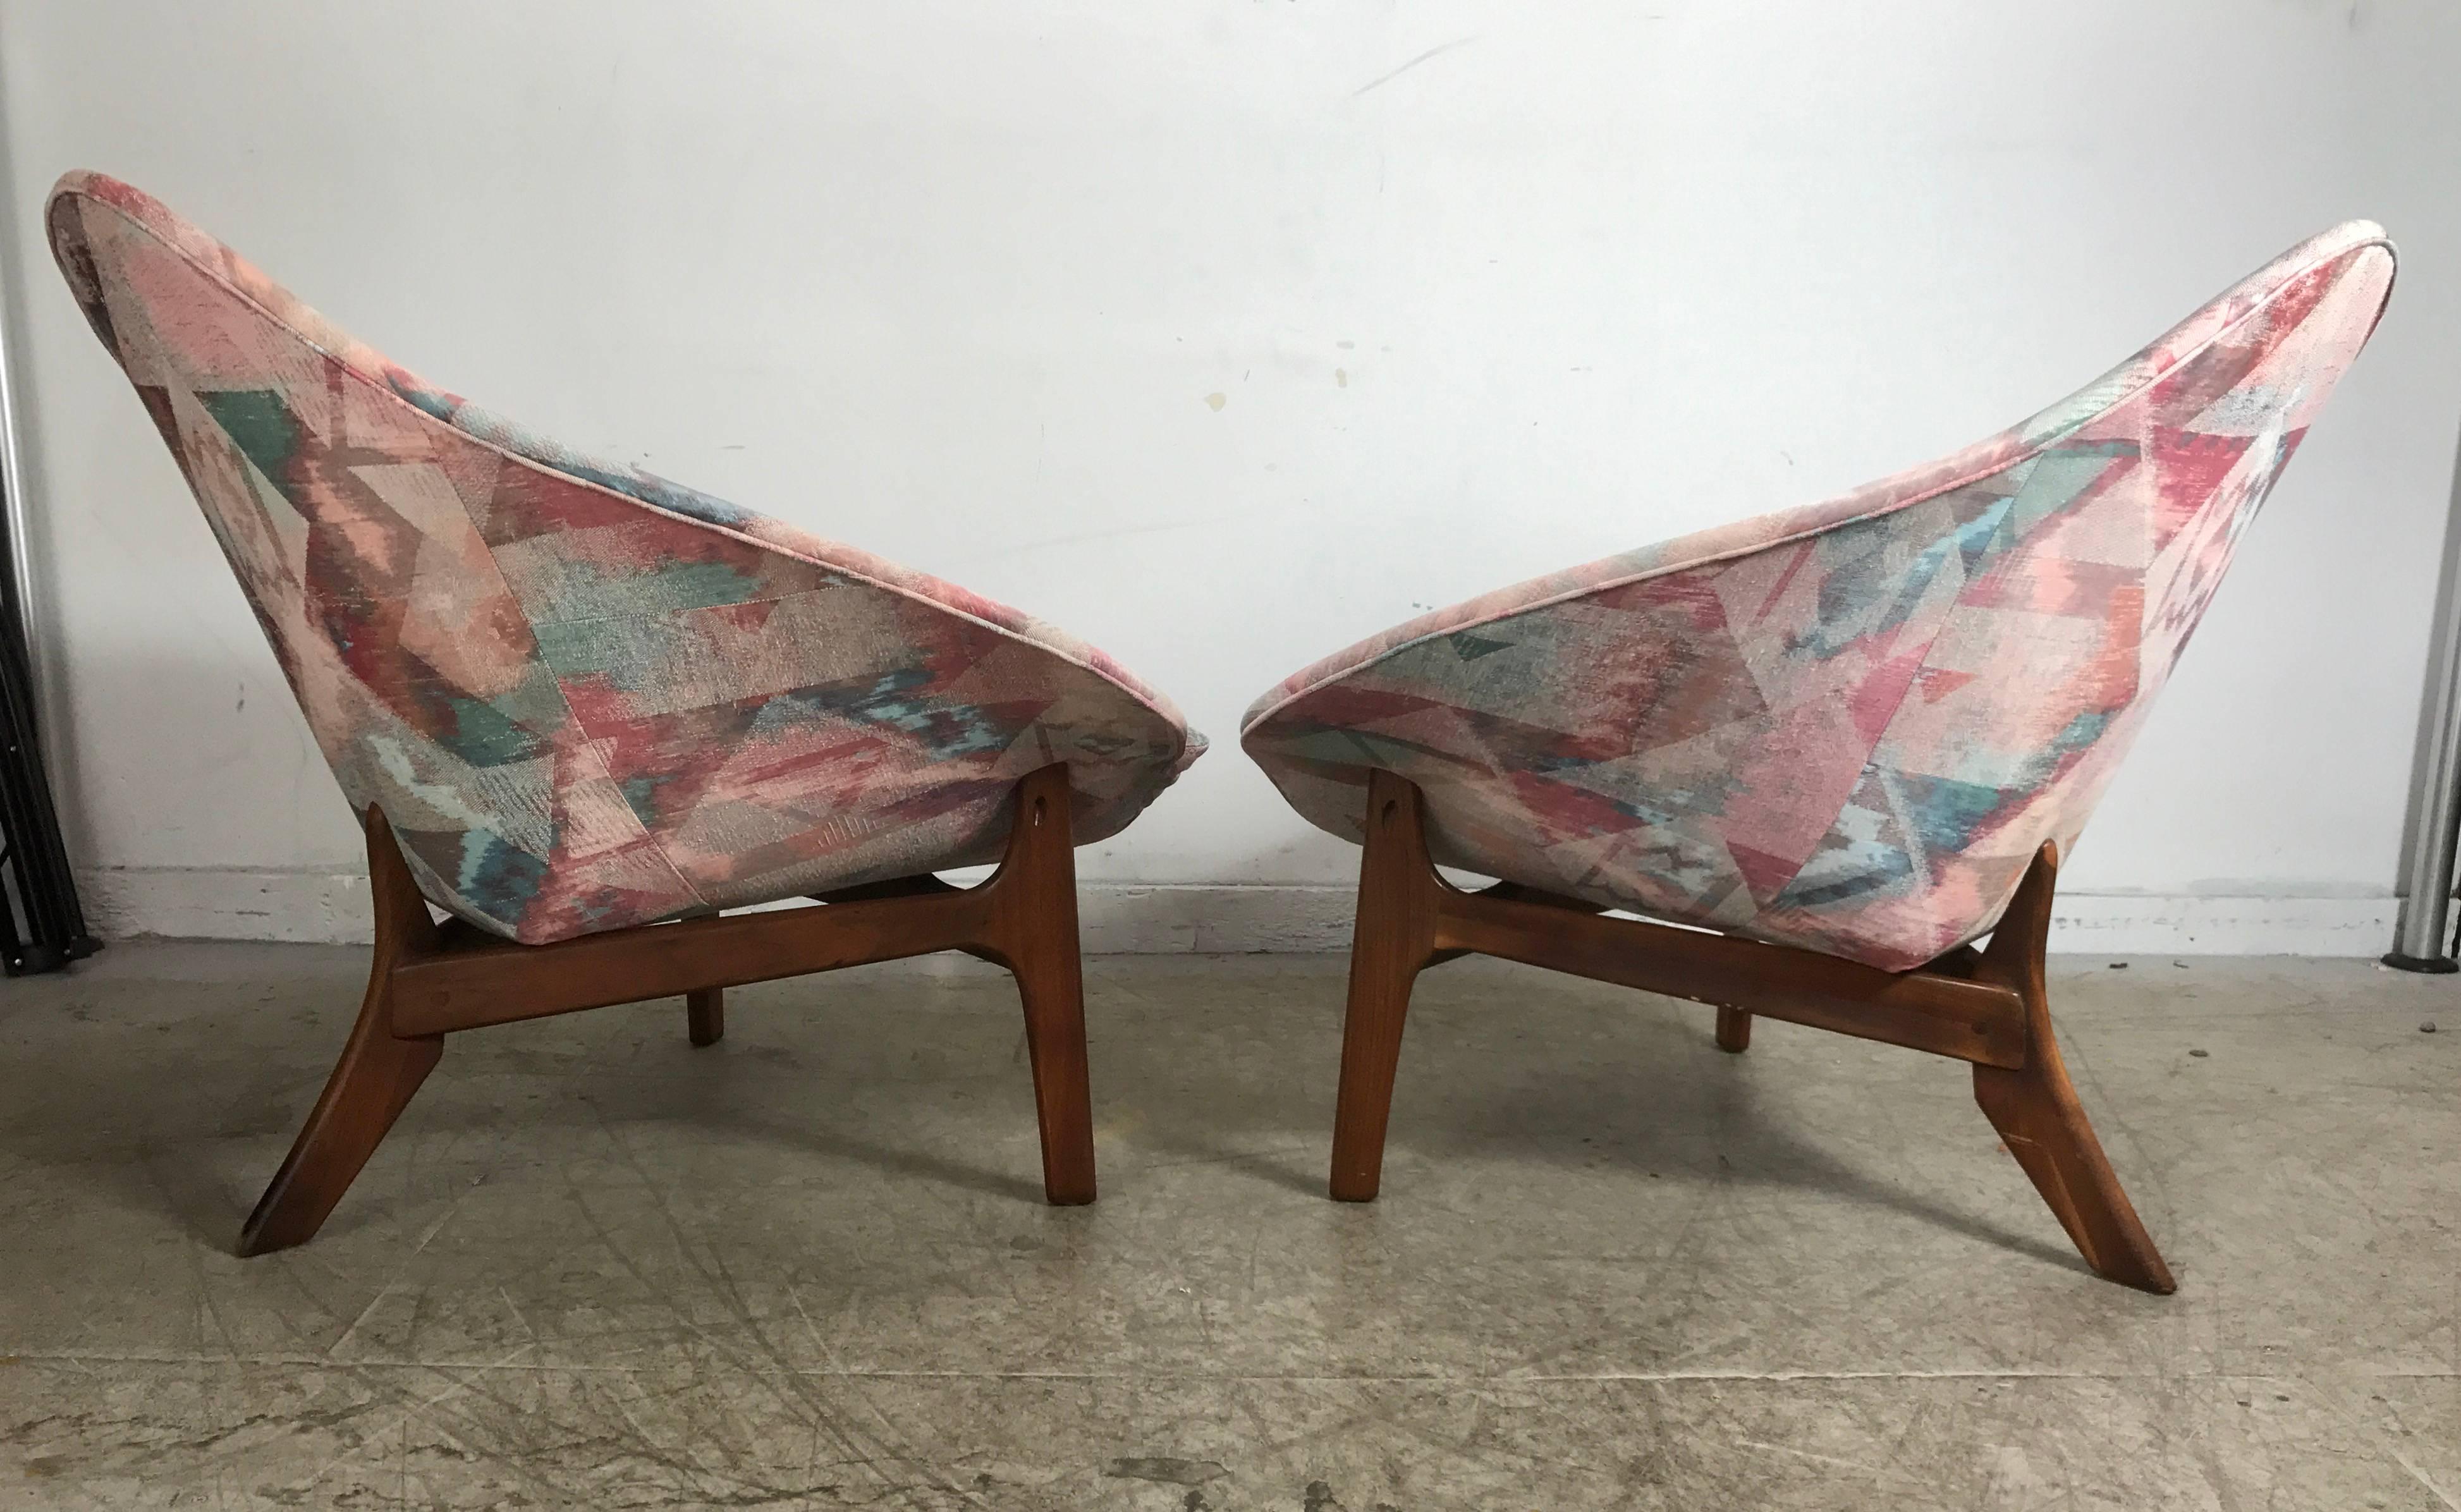 Pair of Mid-Century Modern Sculptural Walnut Lounge Chairs by Adrian Pearsall In Good Condition For Sale In Buffalo, NY